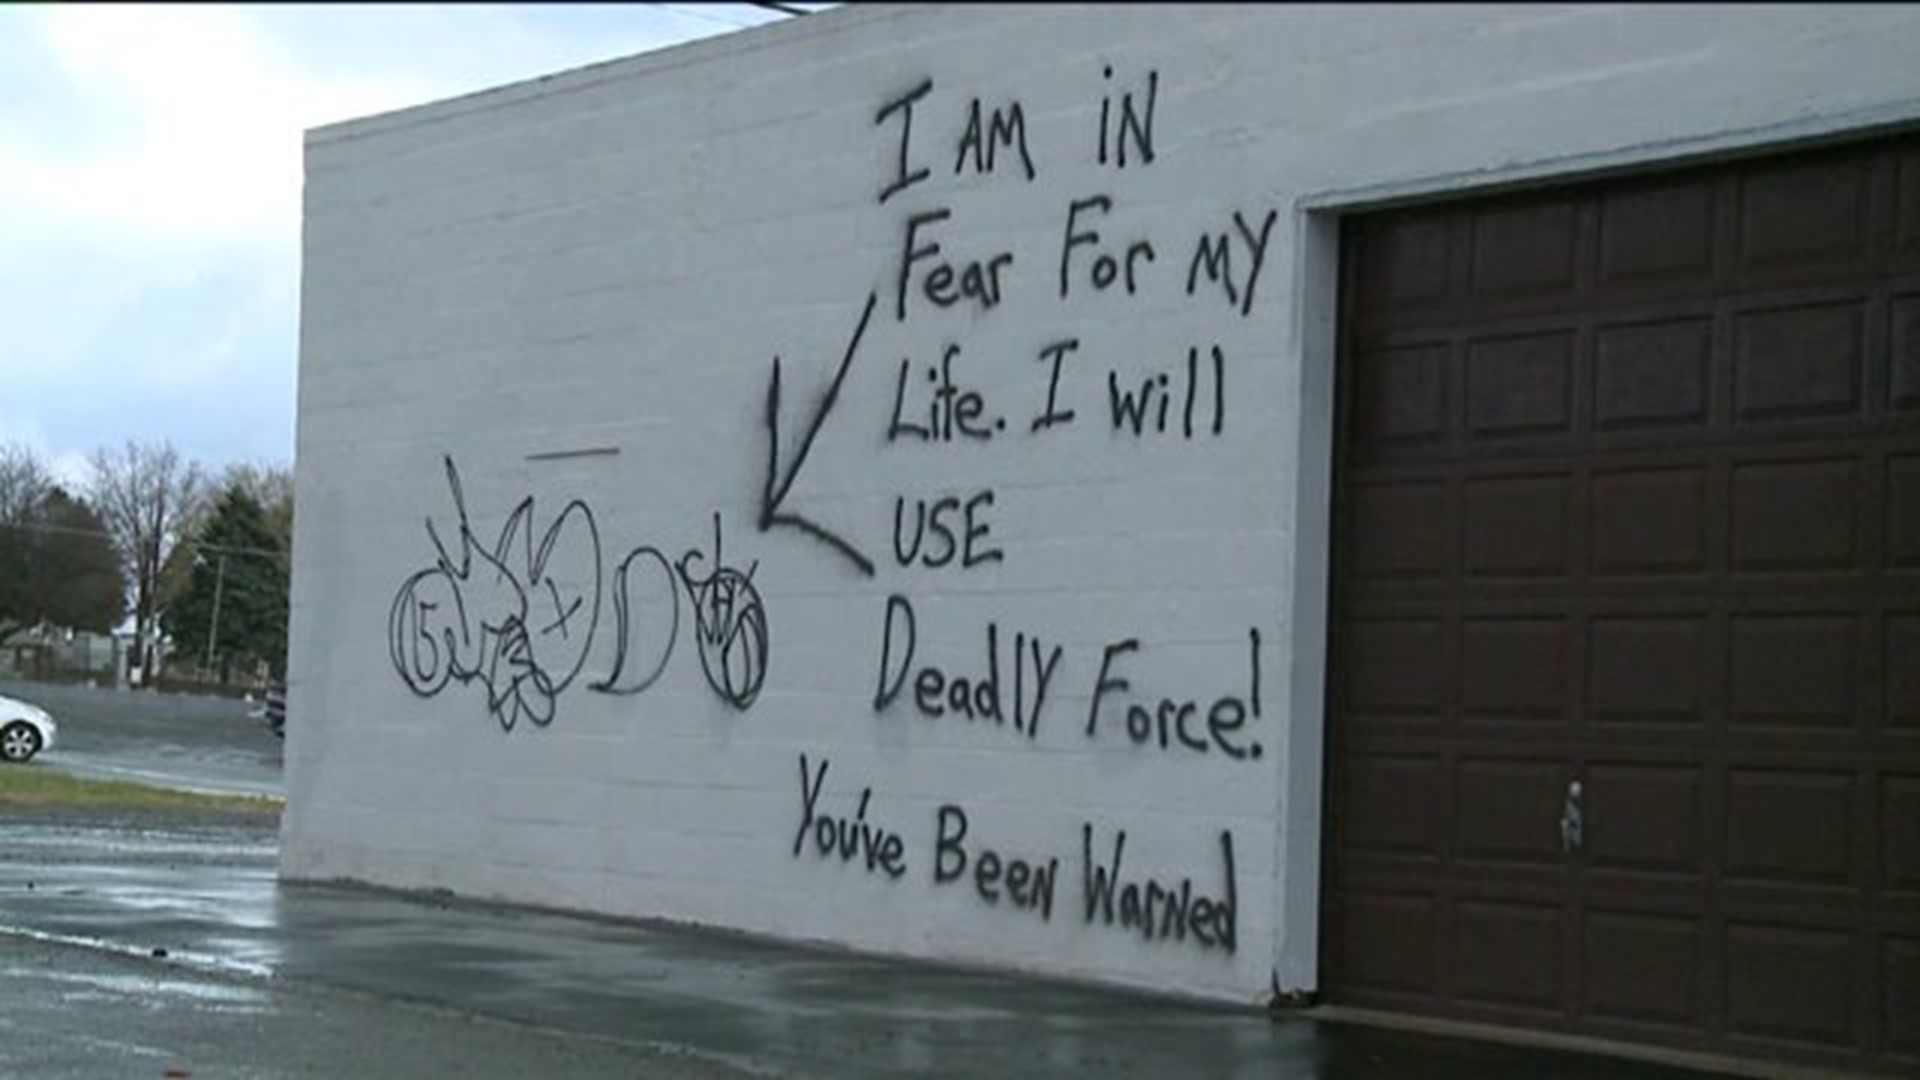 Auto Shop Owner Has Warning for Vandals